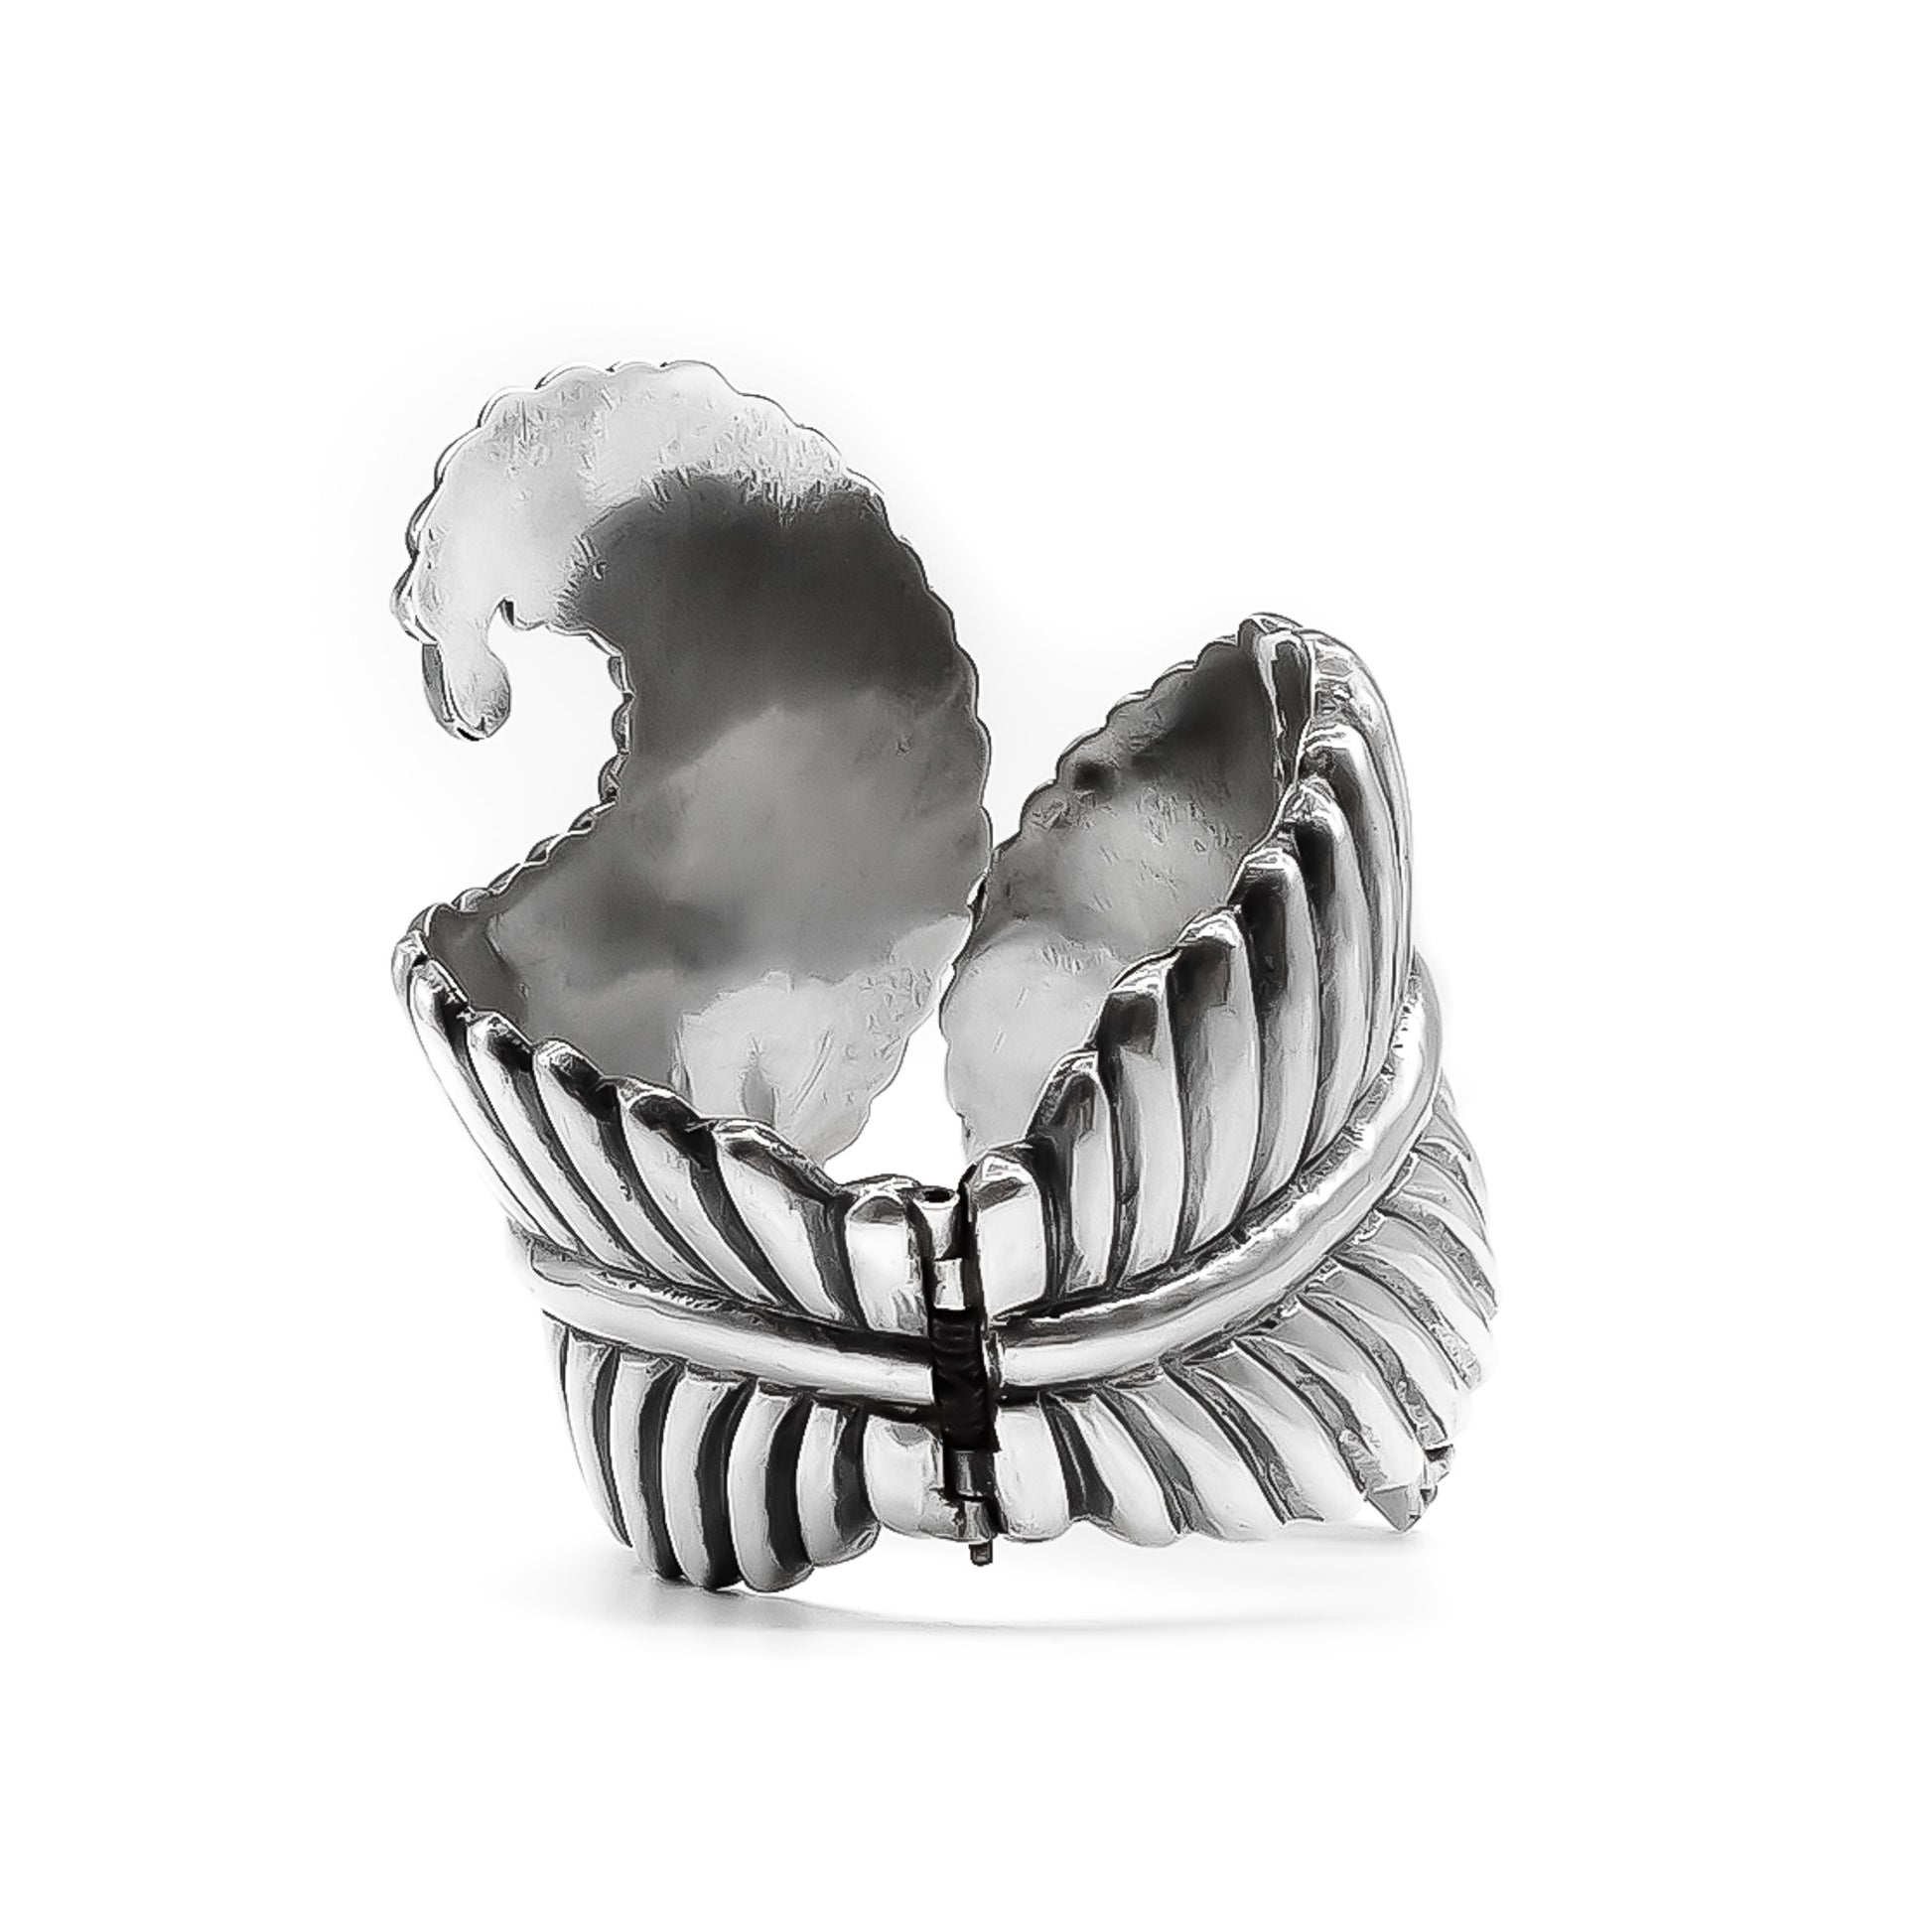 Gorgeous sterling silver Mexican repousse clamper bangle with a fern leaf design. Bangle opens to fit most wrists. Taxco. Eagle Hallmark